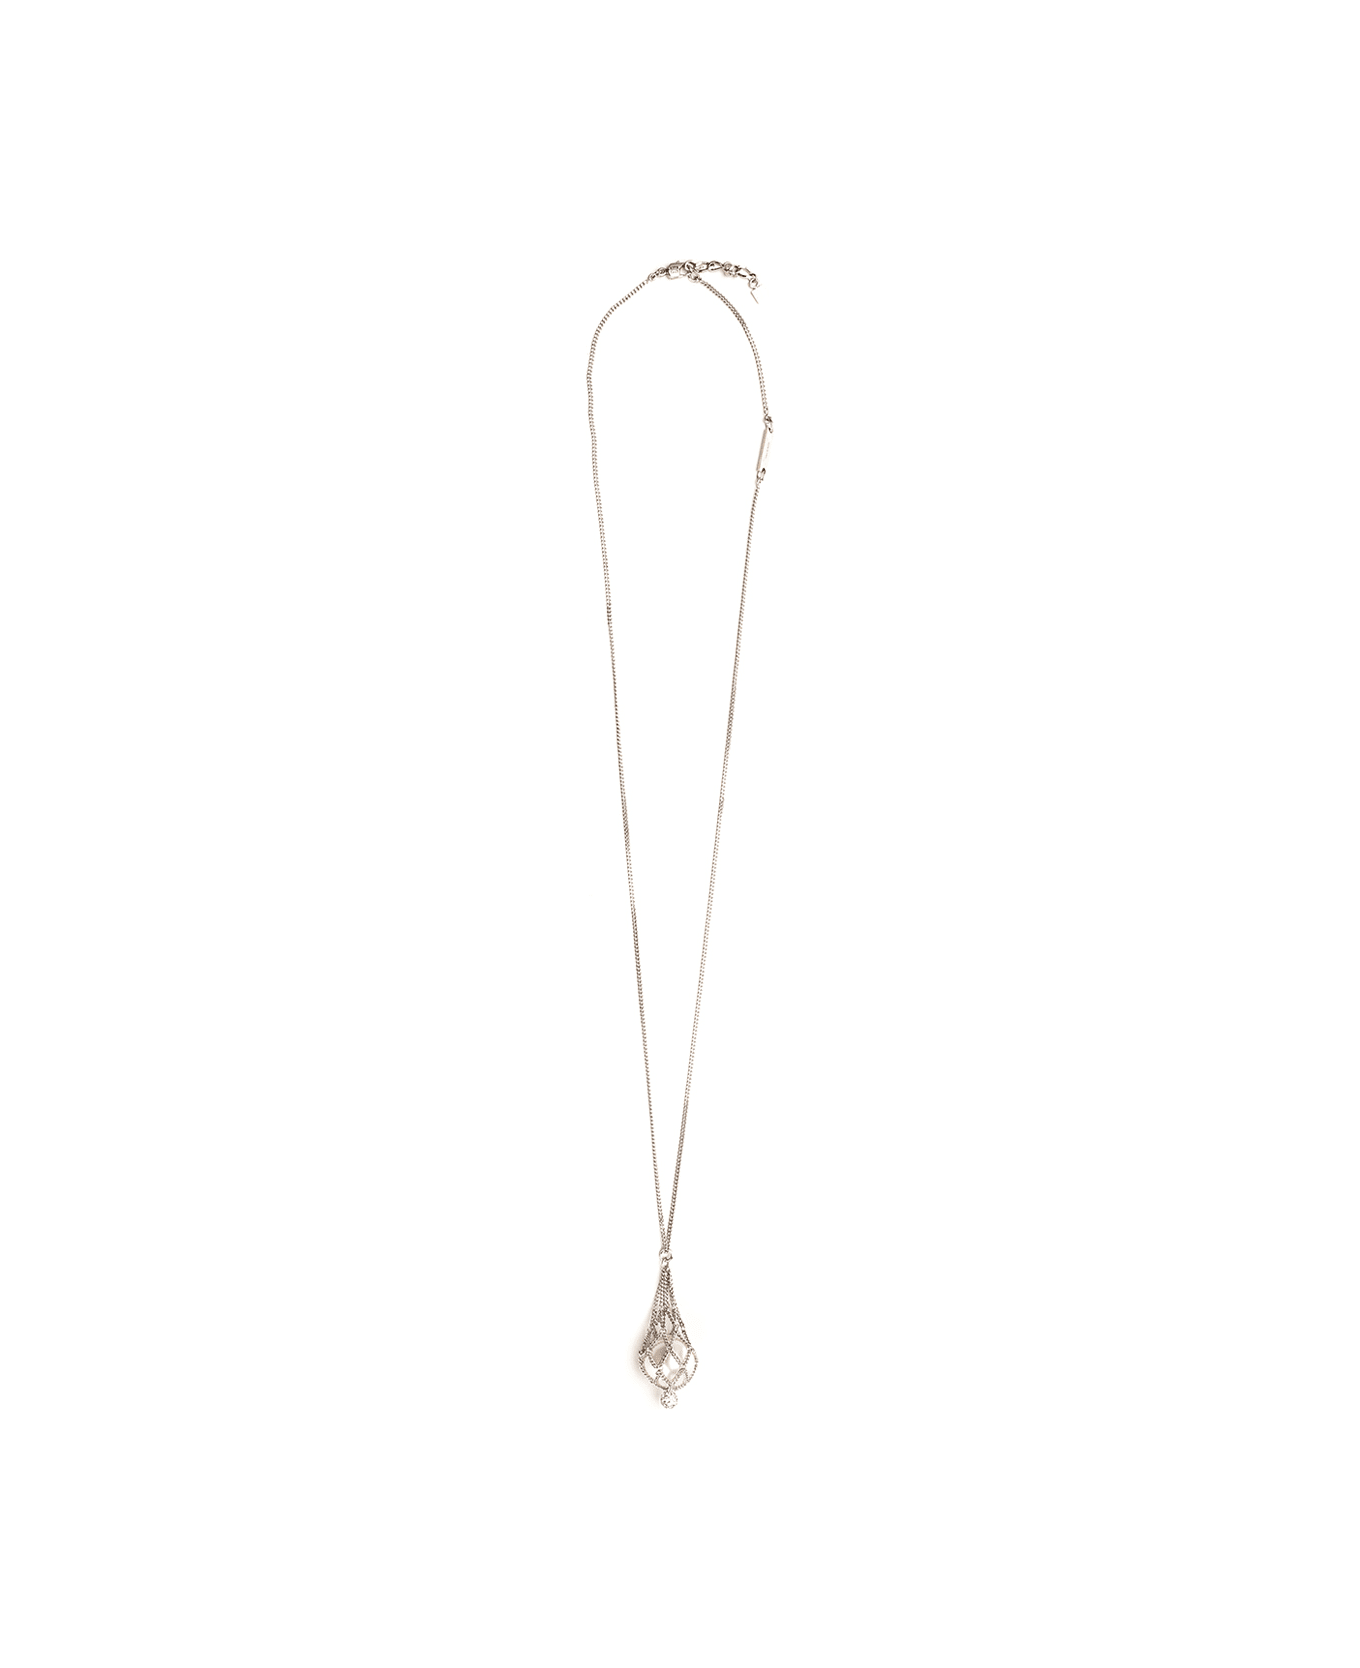 Givenchy Pearling Long Necklace - Silver